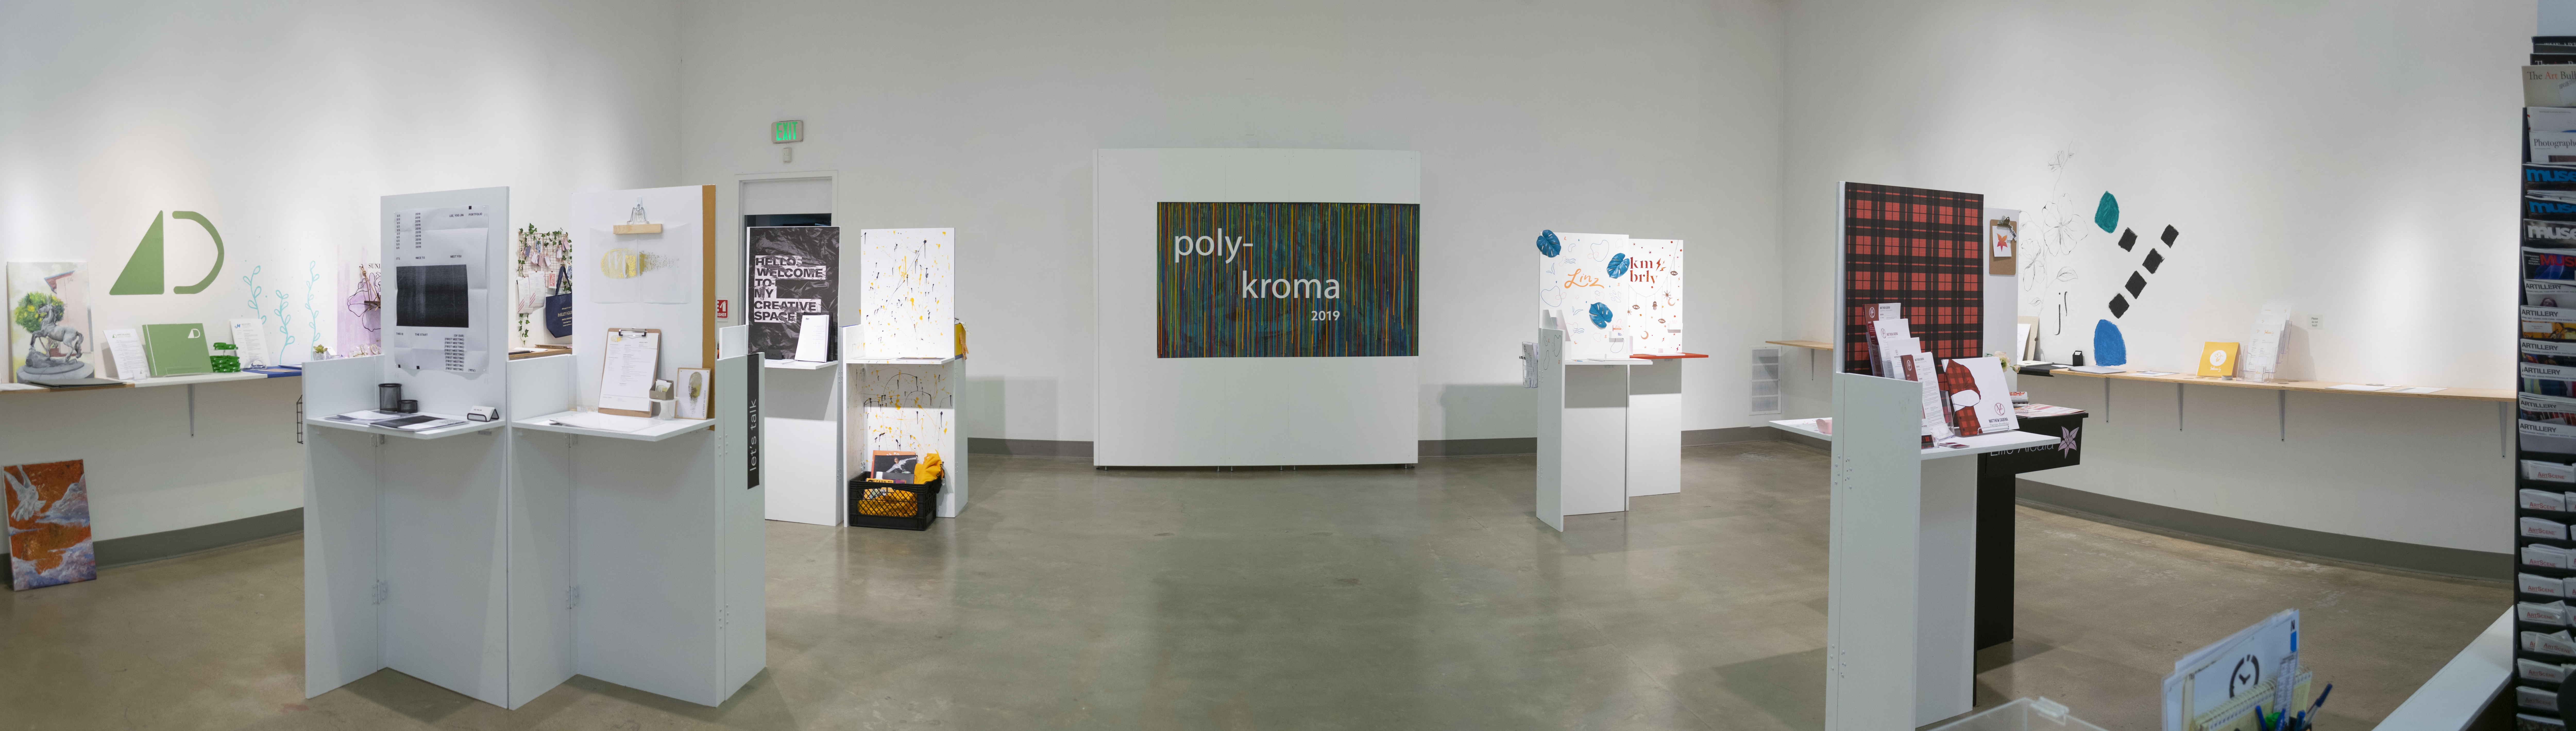 Senior Portfolio area at front of gallery, Exhibition: PolyKroma 2019, Apr. 27, 2019 to May 19, 2019, Co-curated by Michele Cairella Fillmore & Sooyun Im, W. Keith & Janet Kellogg Art Gallery, Cal Poly Pomona.